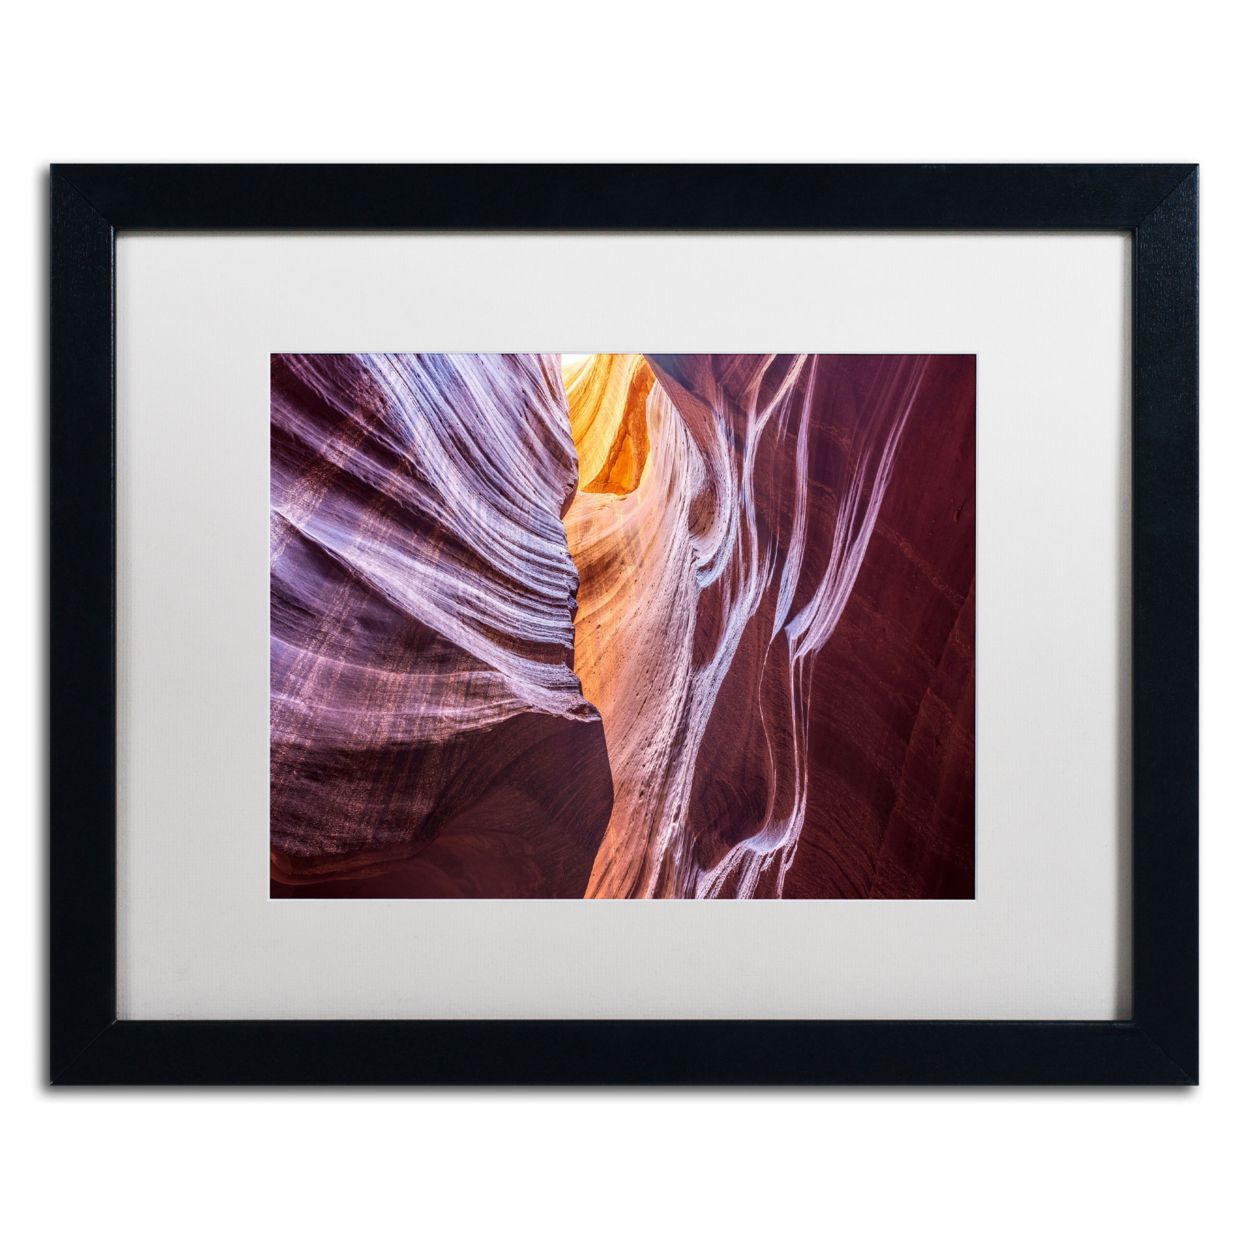 Pierre Leclerc 'Canyon Abstract' Black Wooden Framed Art 18 X 22 Inches